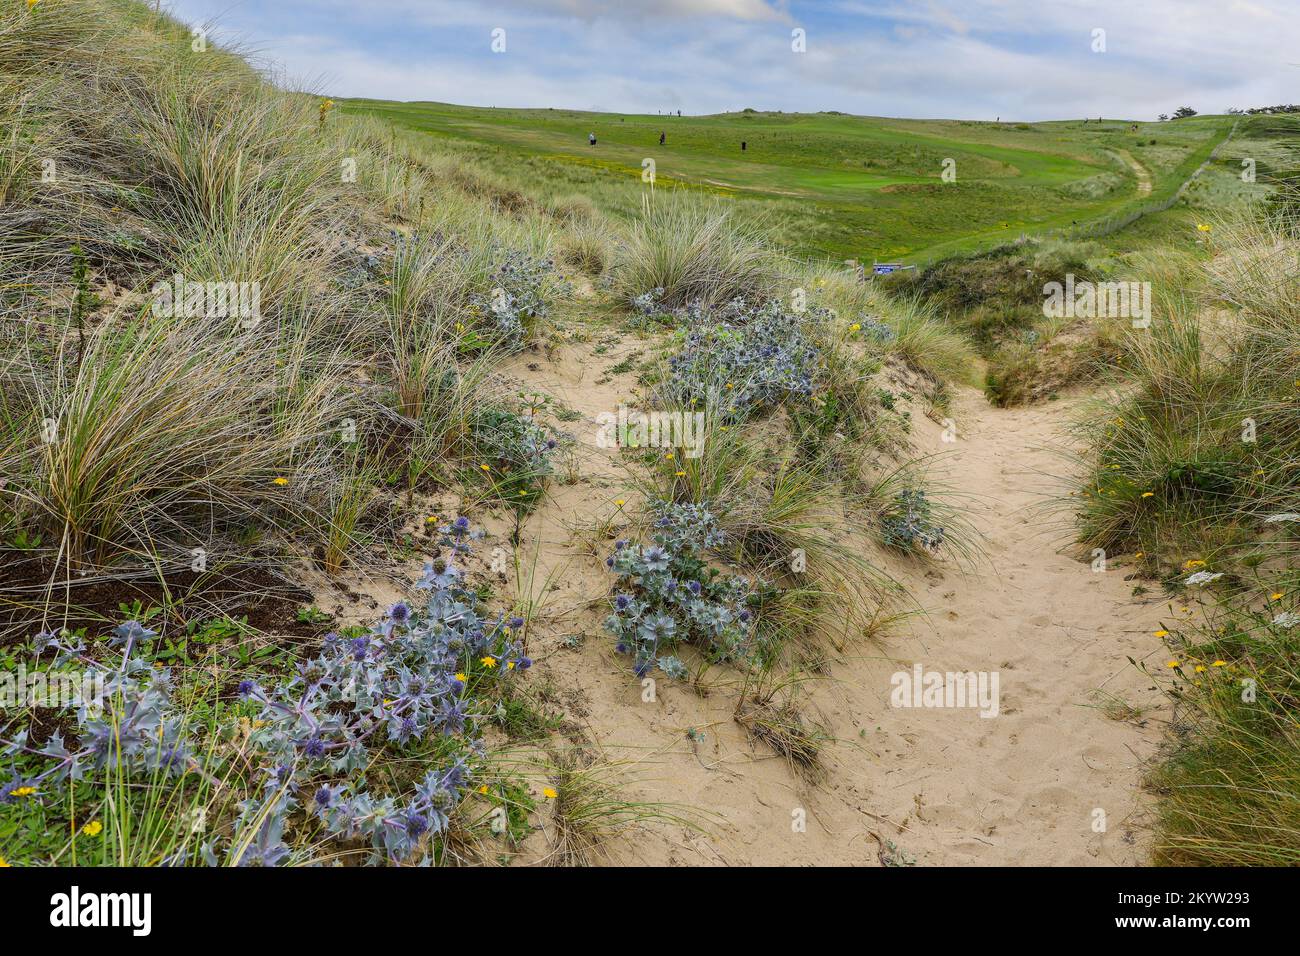 The bright blue spiky flowers of a Sea Holly or Eryngo (Eryngium), growing on a sand dune, Holywell Bay golf course, Cornwall, England, UK Stock Photo